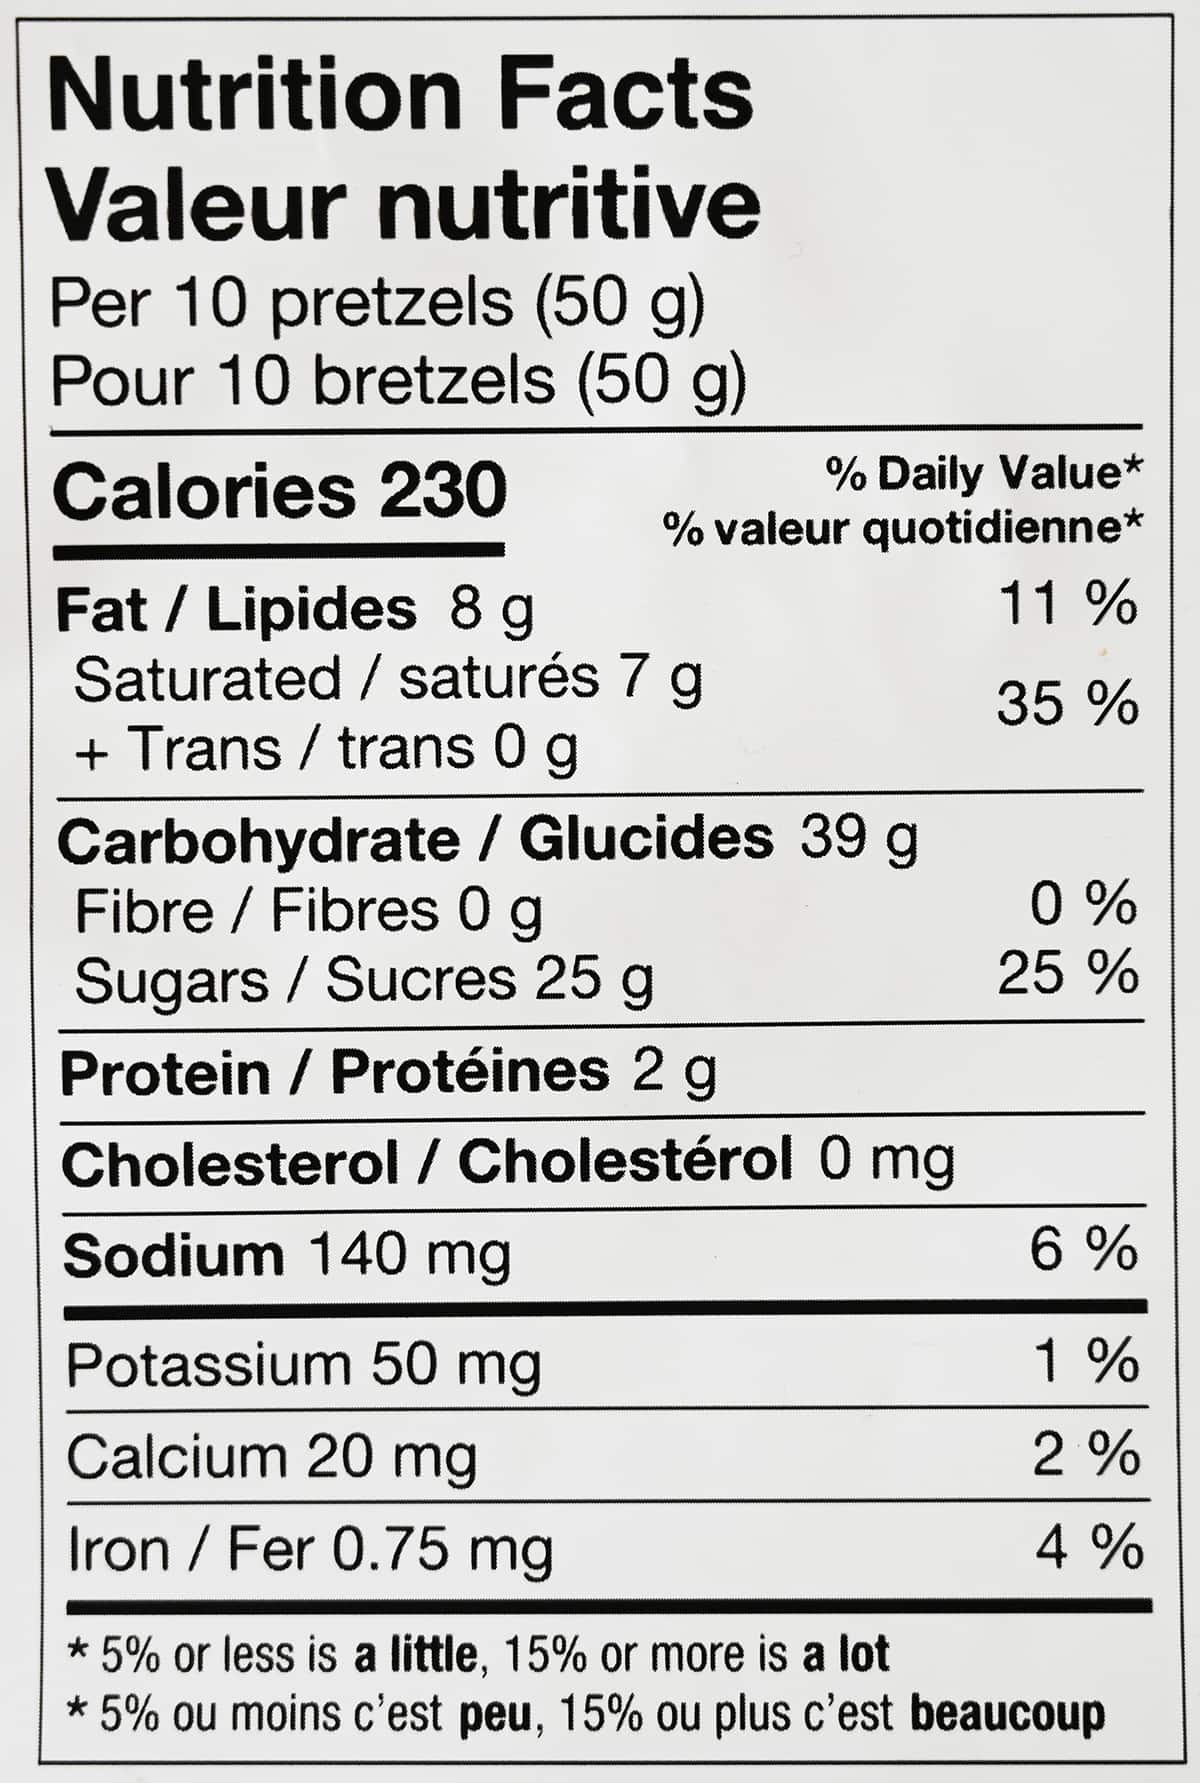 Closeup image of the nutrition facts label for the birthday cake yogurt pretzels from the bag.